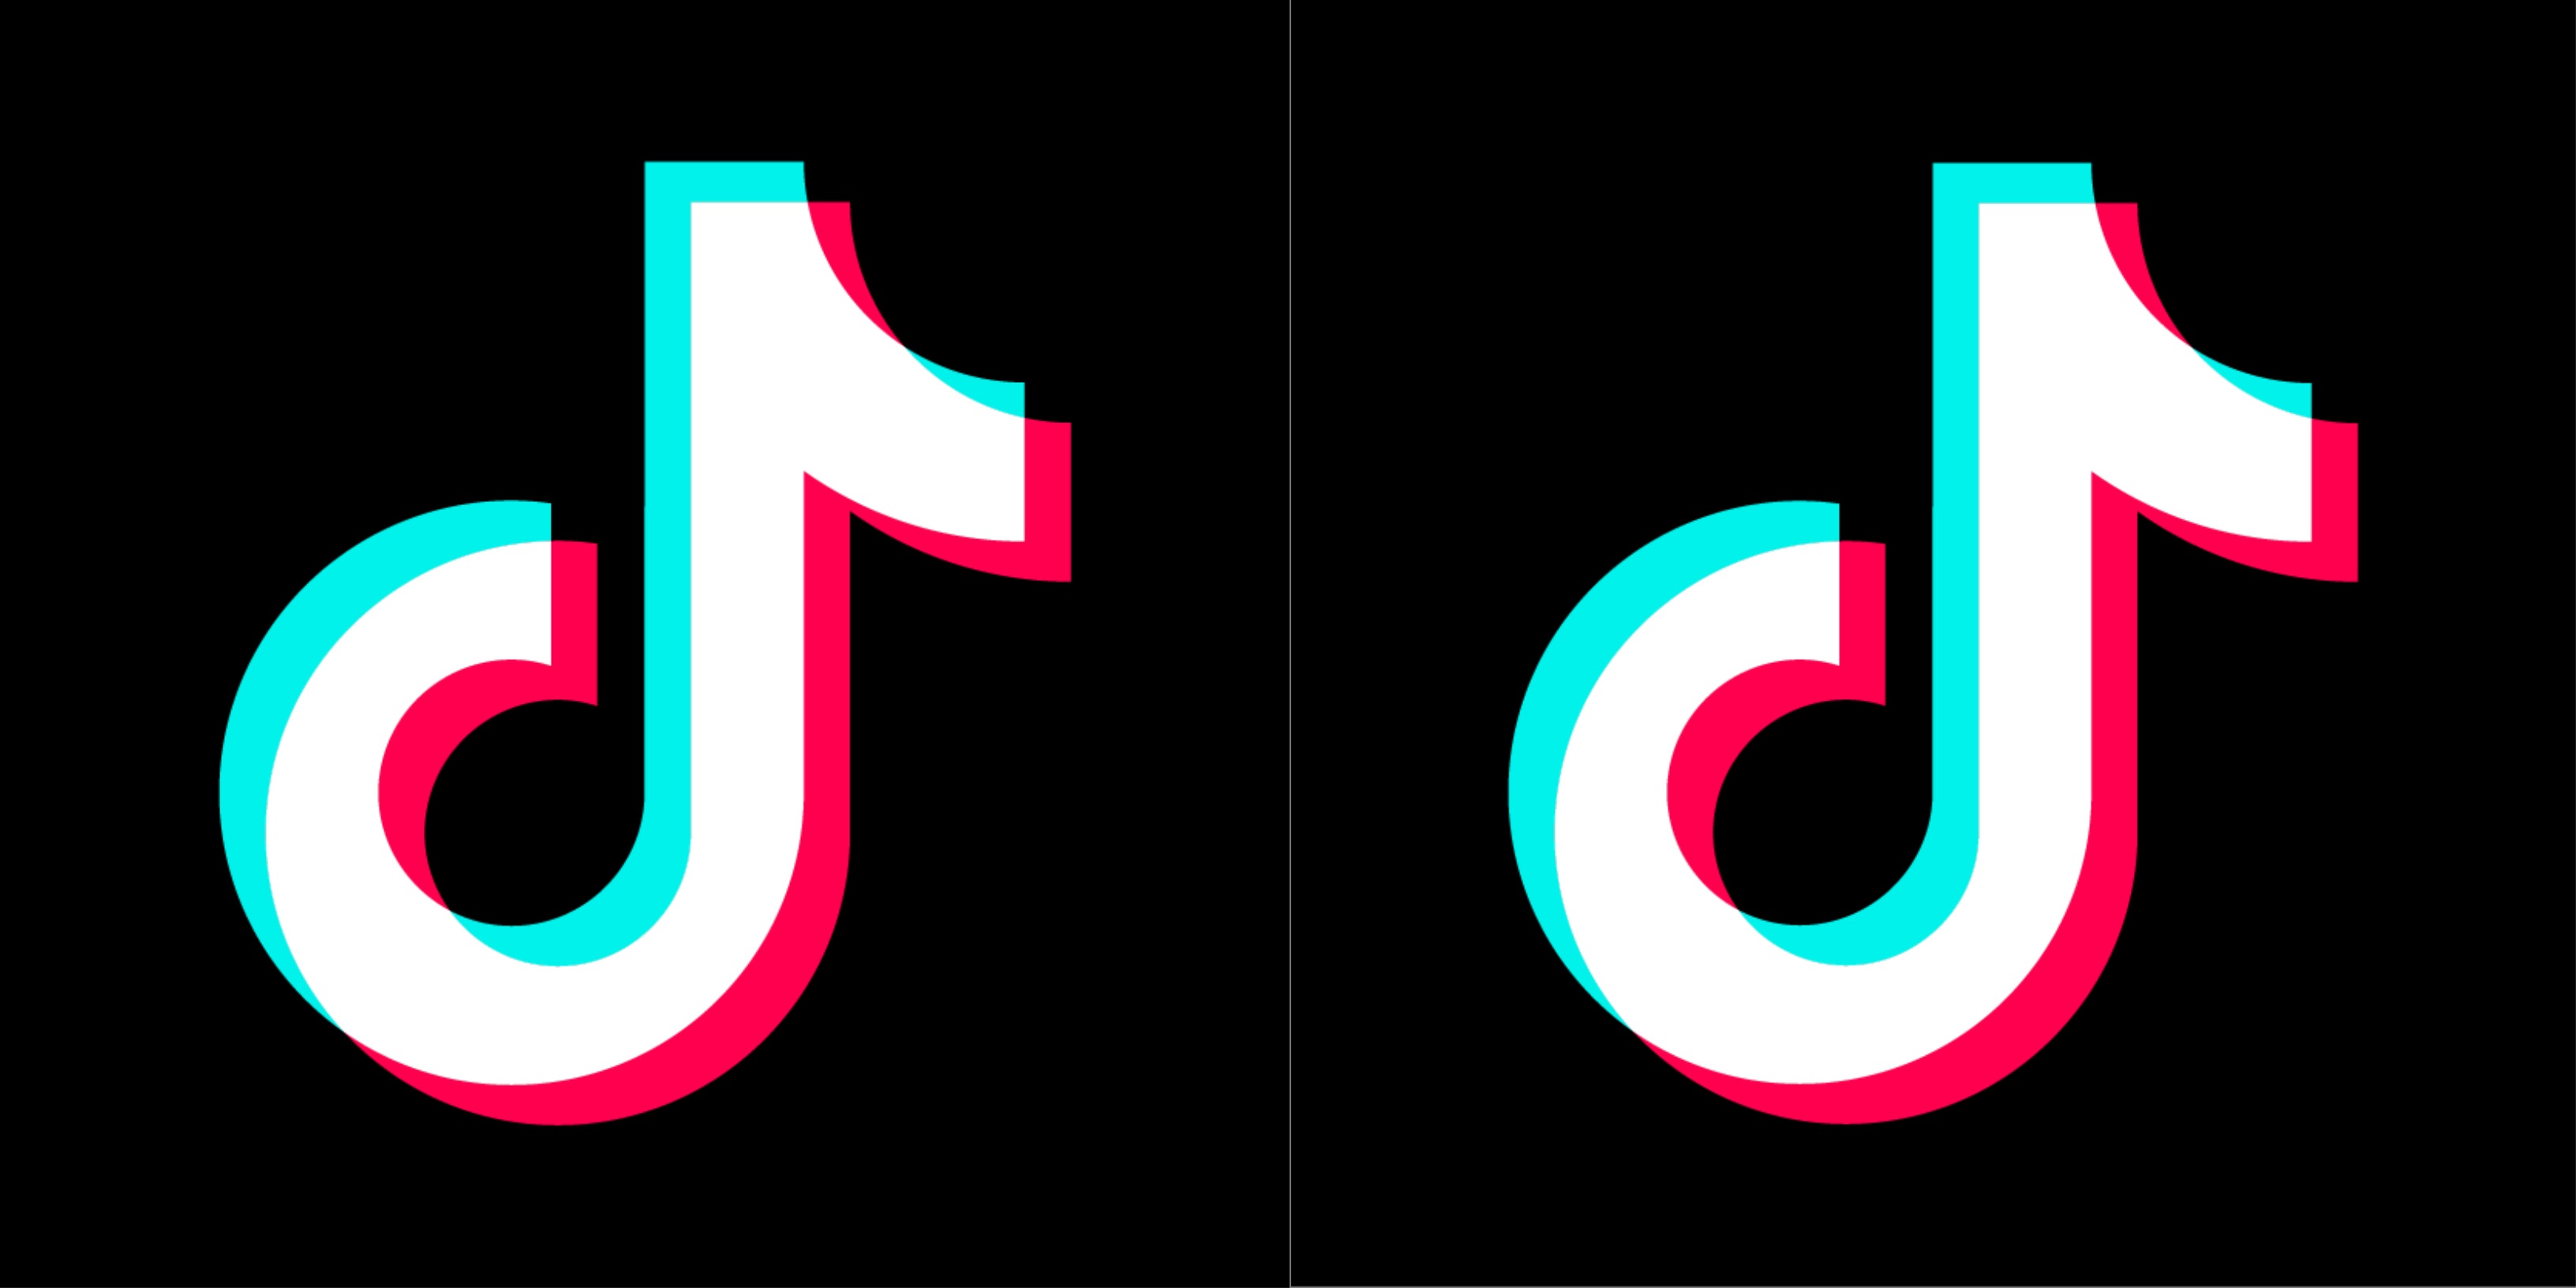 What Is TikTok? Details About The App And How To Use It